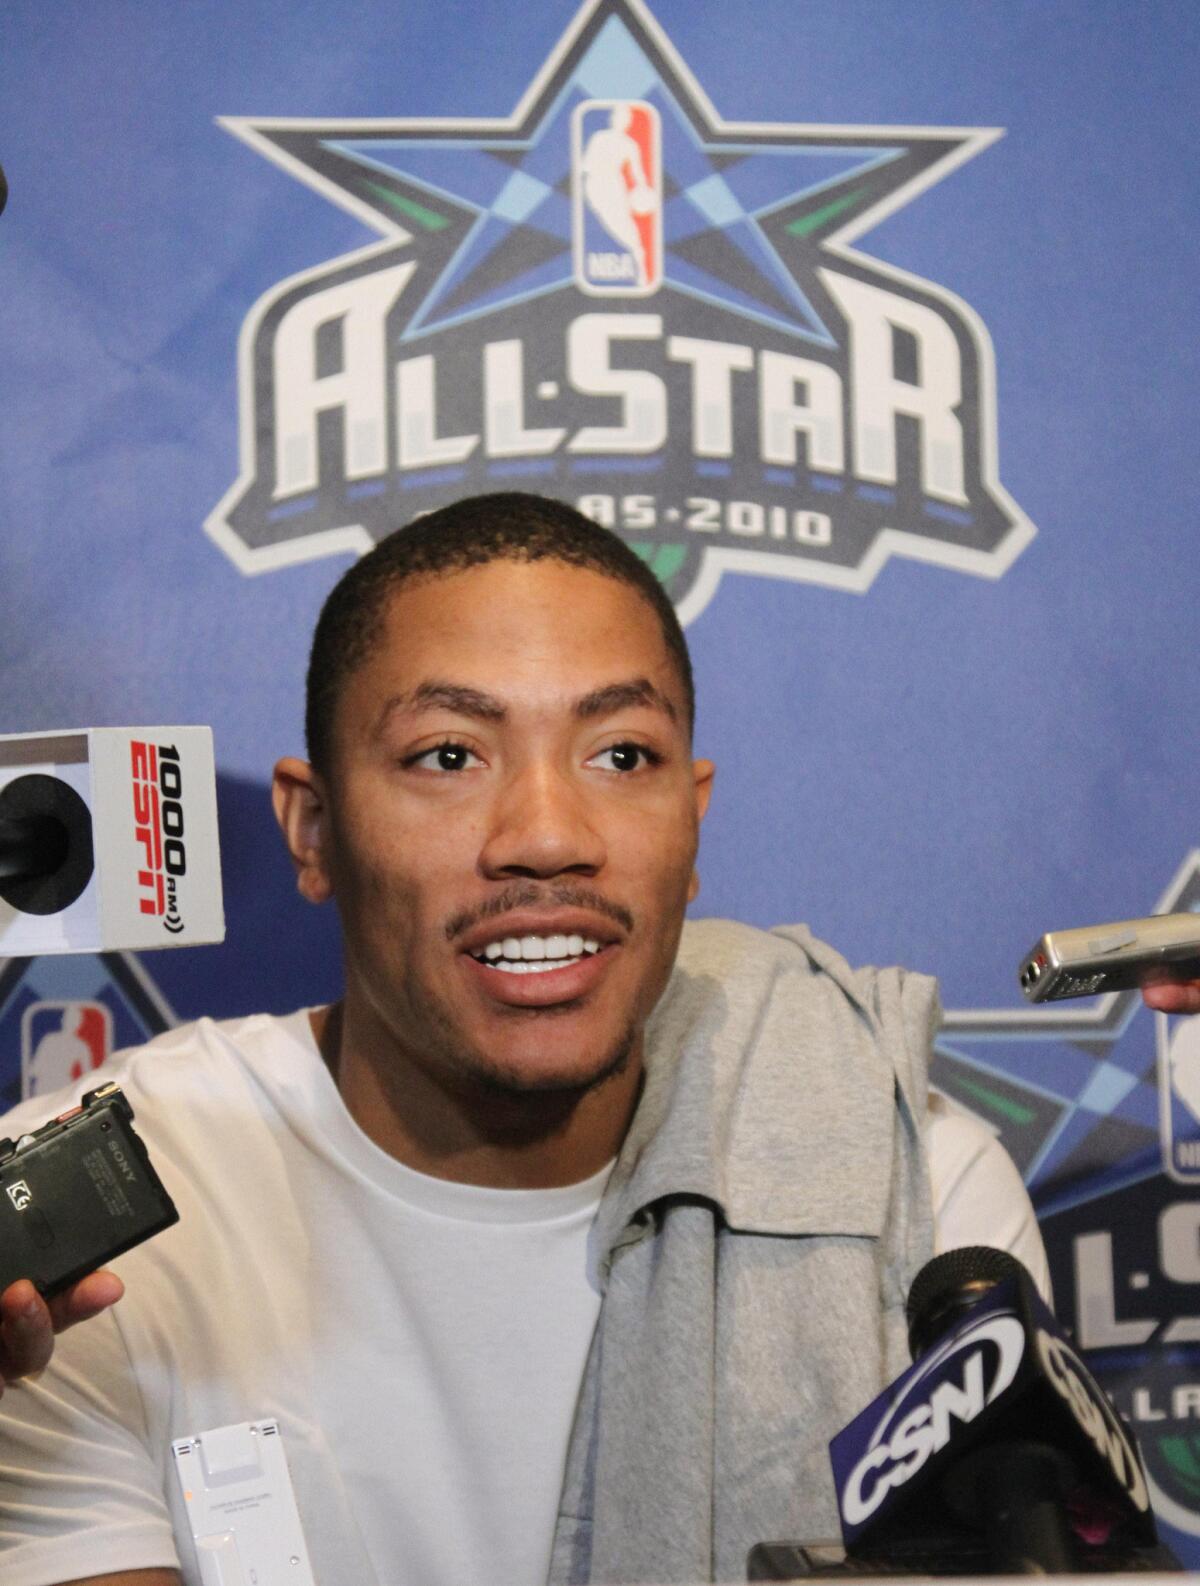 Derrick Rose answers questions during media availability for the 2010 NBA All-Star game in Dallas. (Associated Press)